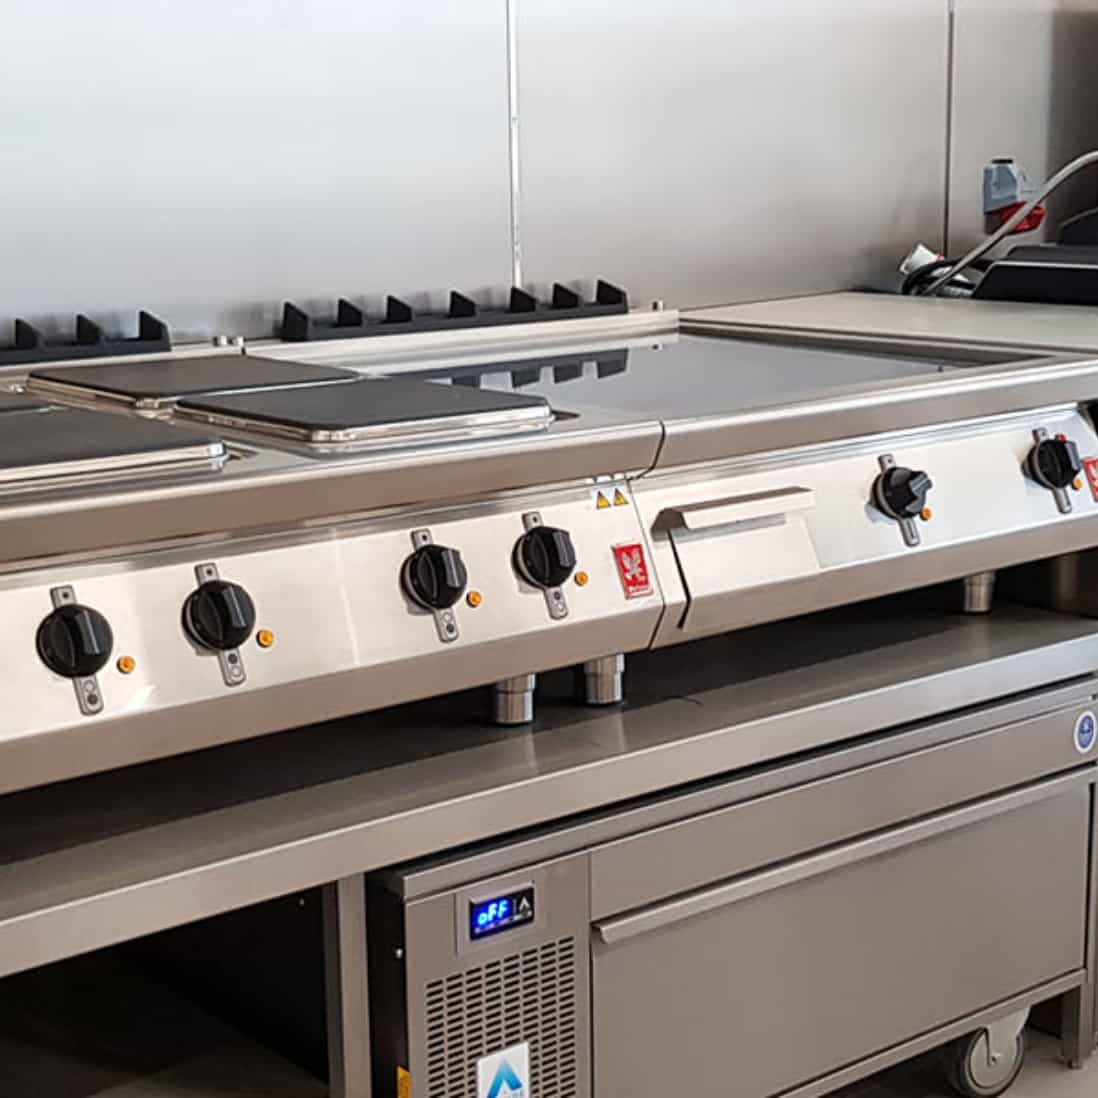 newly installed commercial kitchen equipment